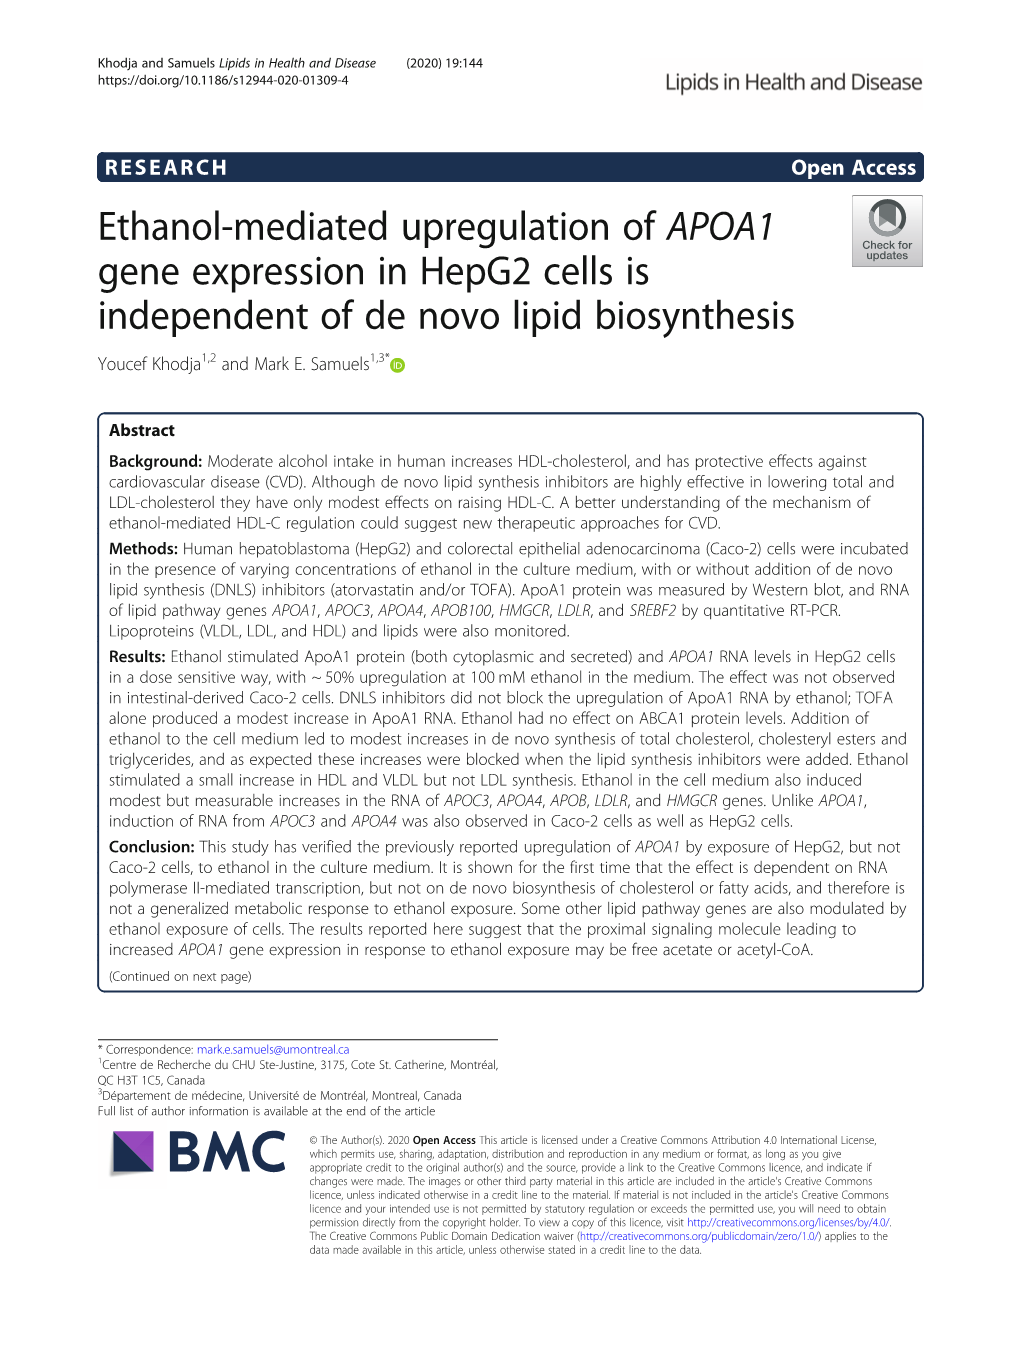 Ethanol-Mediated Upregulation of APOA1 Gene Expression in Hepg2 Cells Is Independent of De Novo Lipid Biosynthesis Youcef Khodja1,2 and Mark E